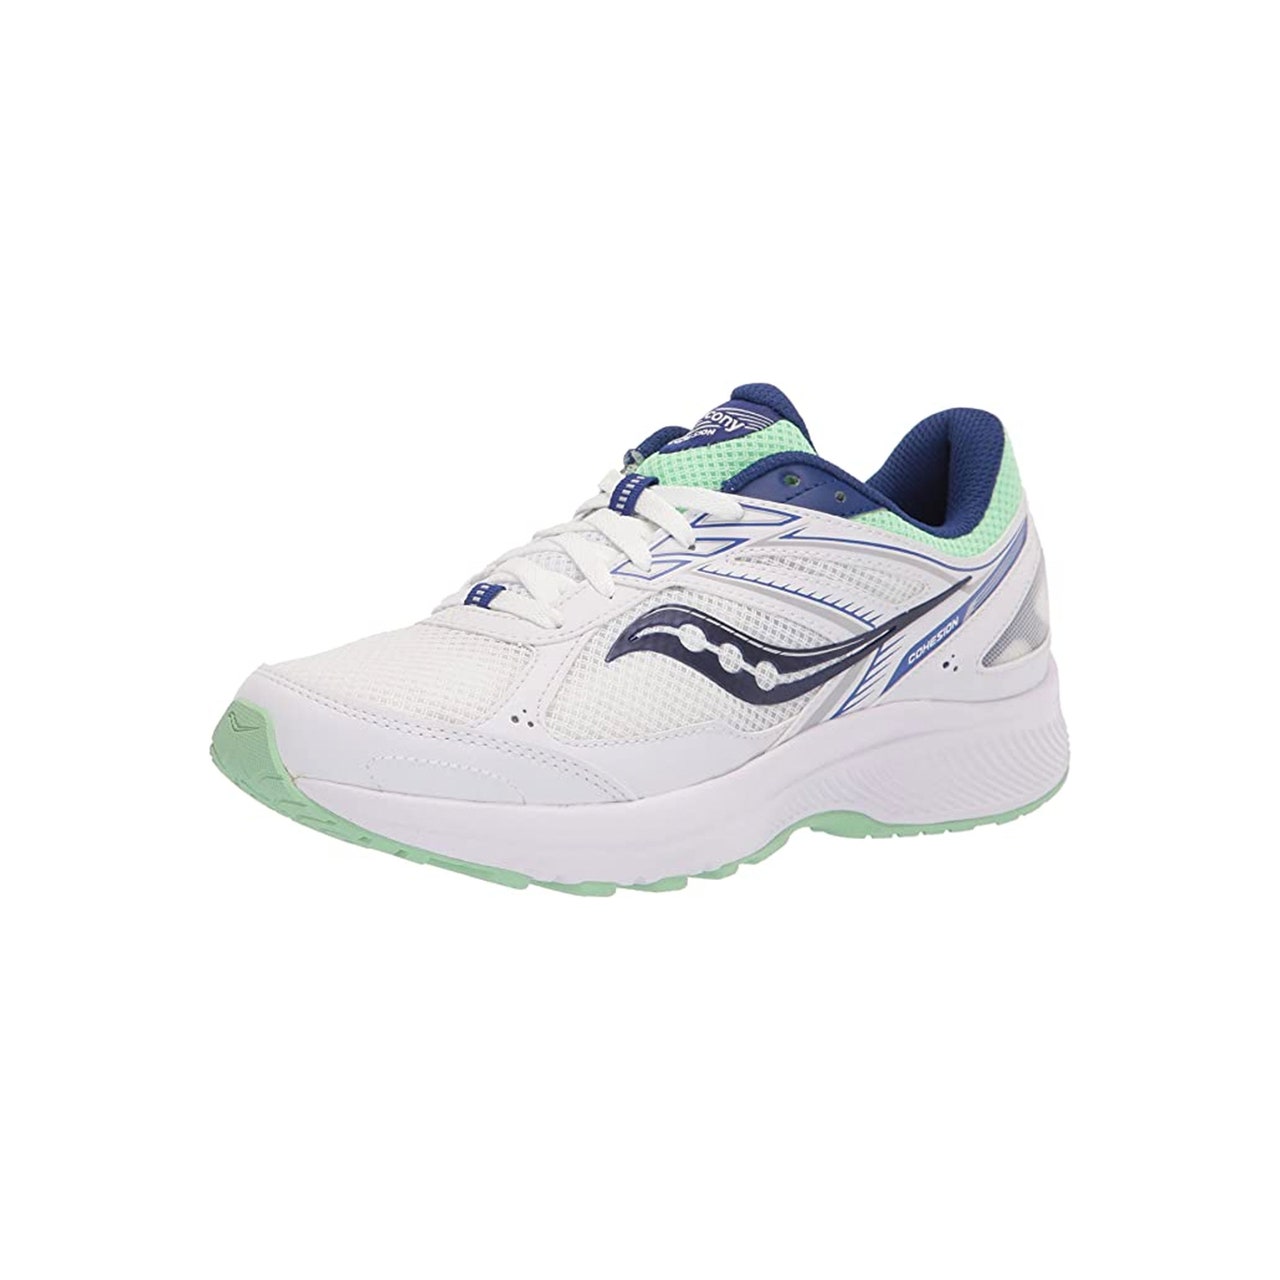 Saucony Cohesion 14, road running shoe for women